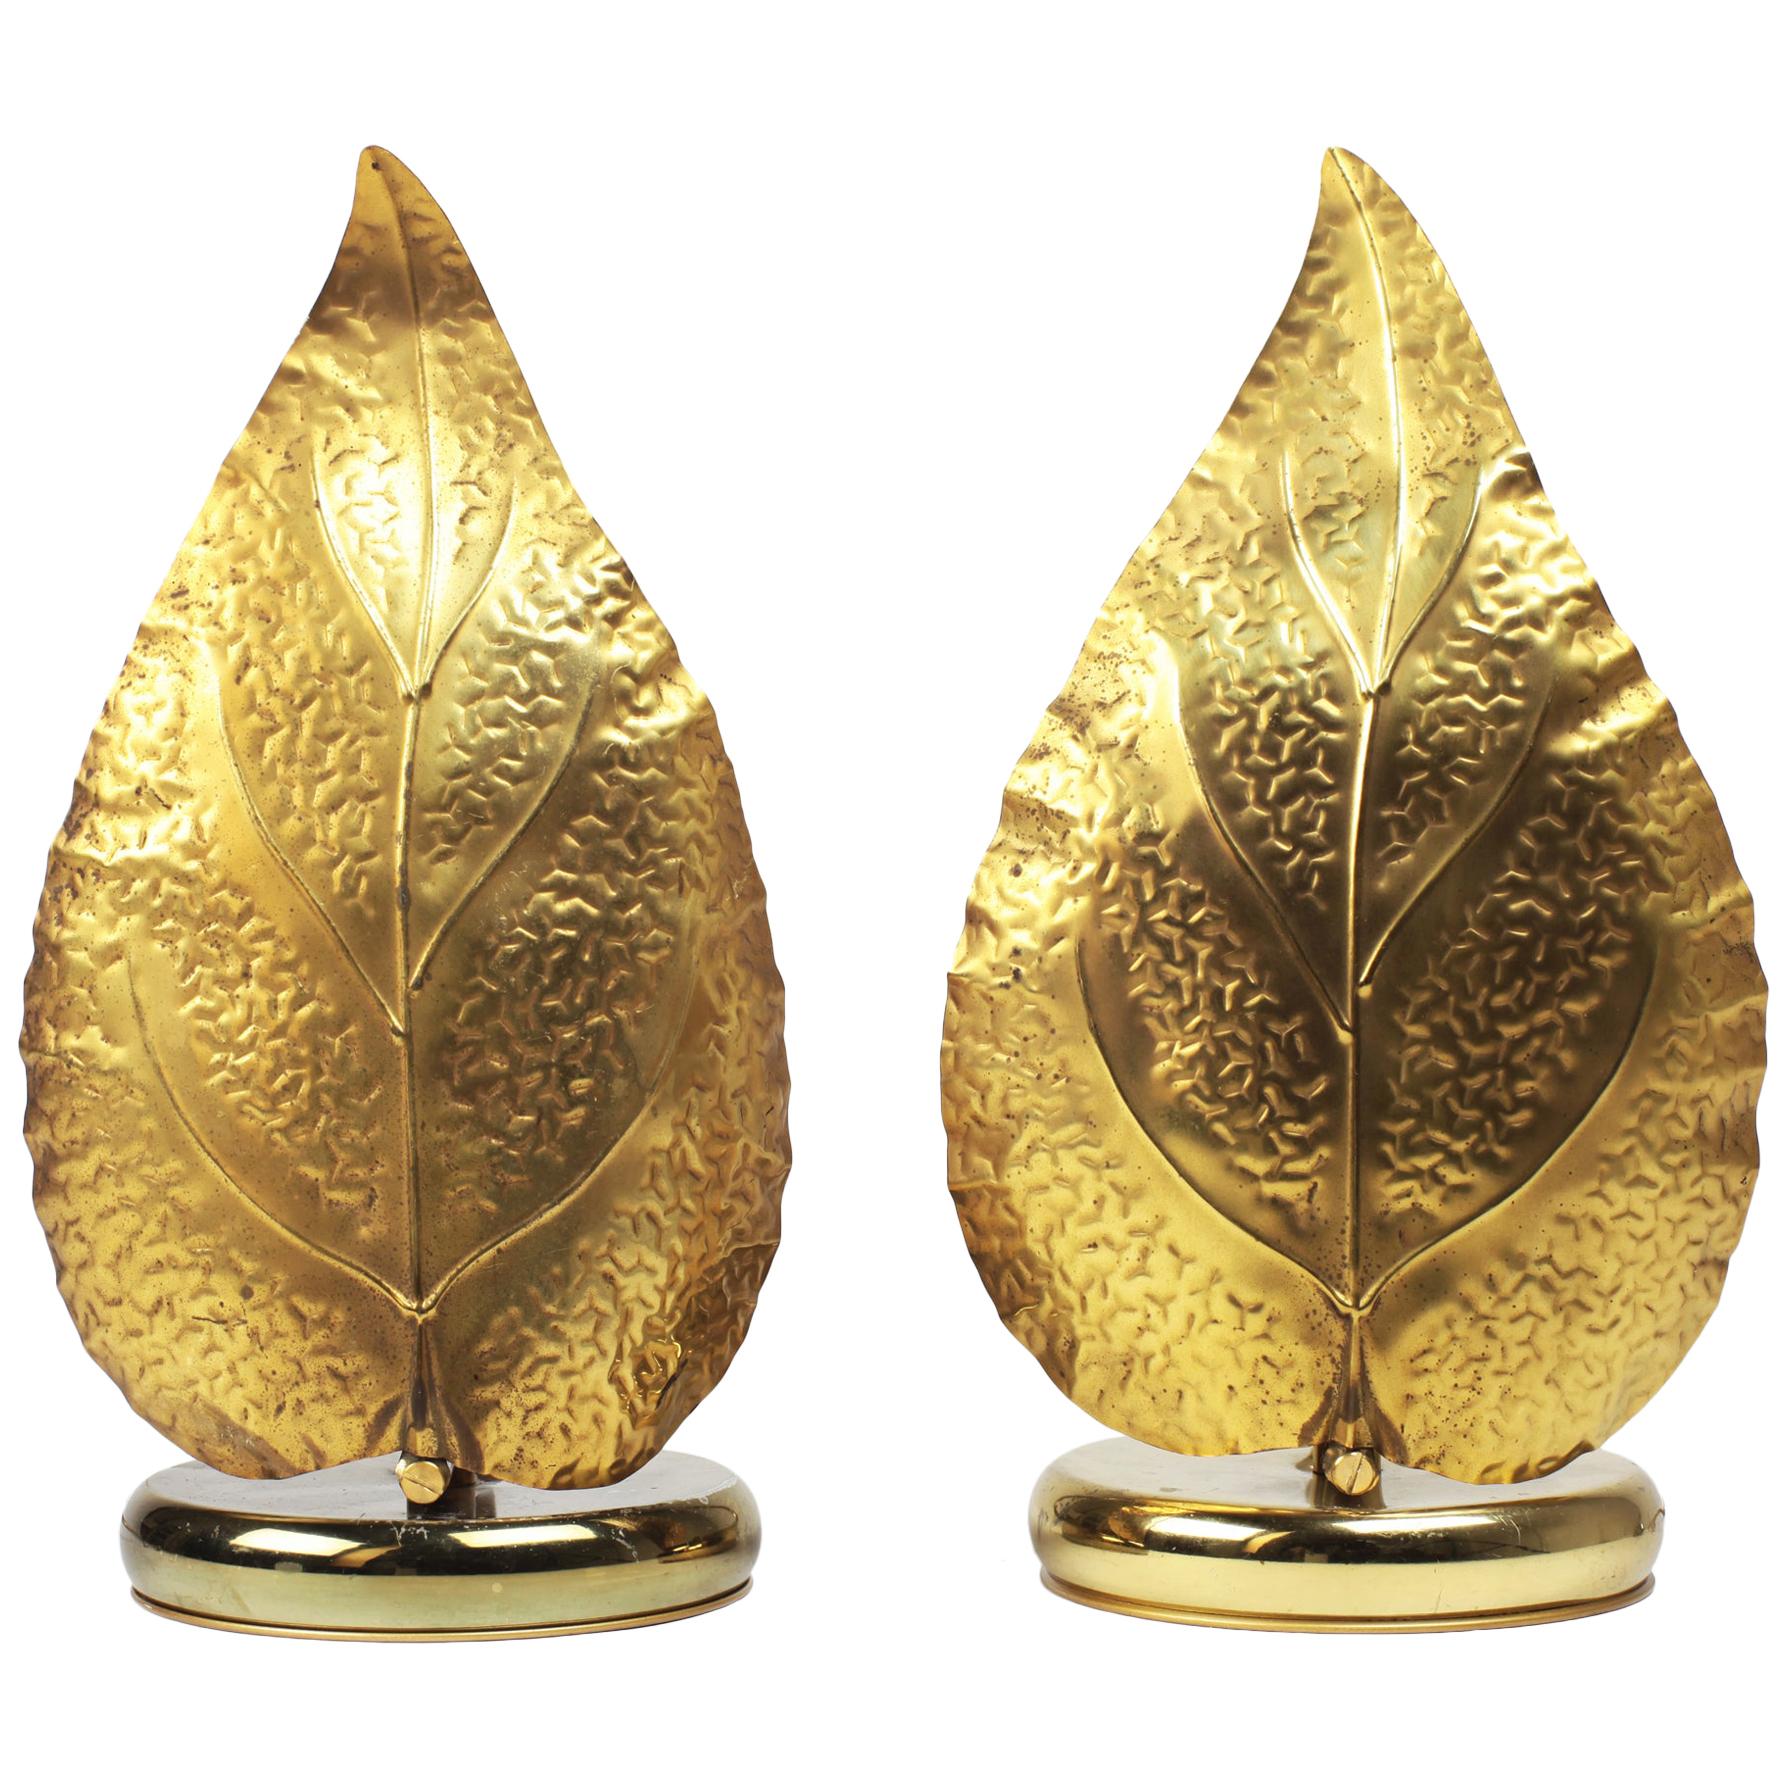 Pair of Mid-Century Modern Leaf-shaped Brass Table Lamps, Italy, 1970s